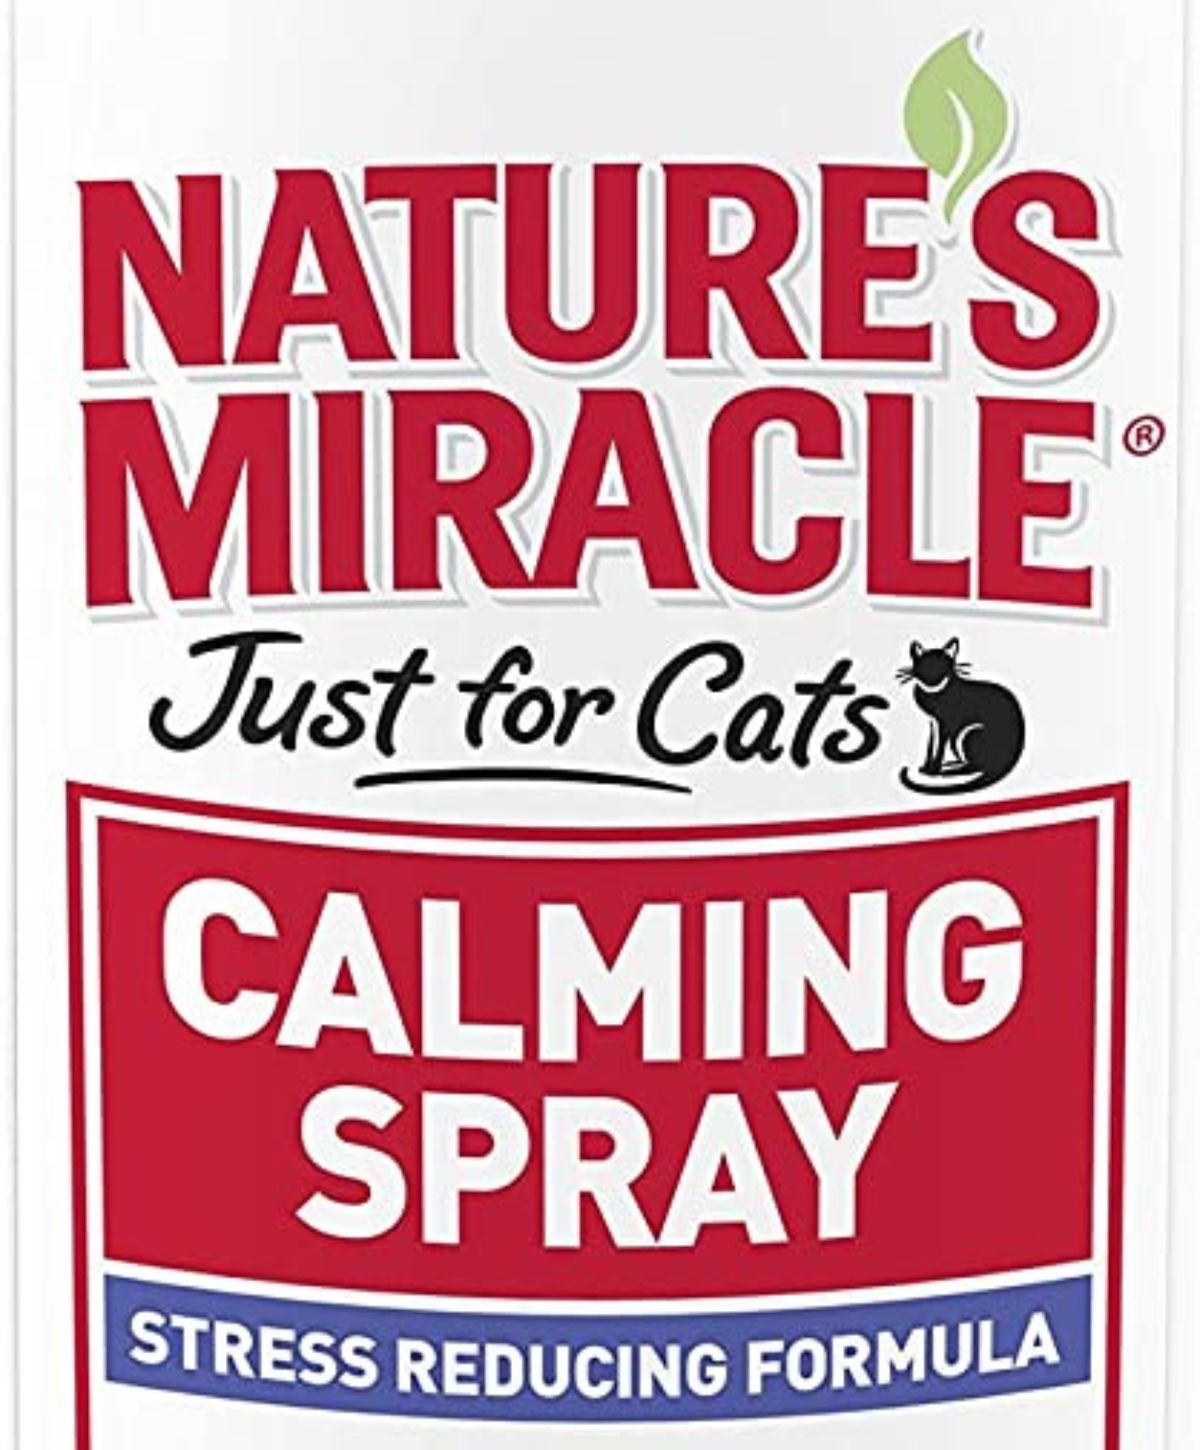 Nature’s Miracle Just for Cats Calming Spray